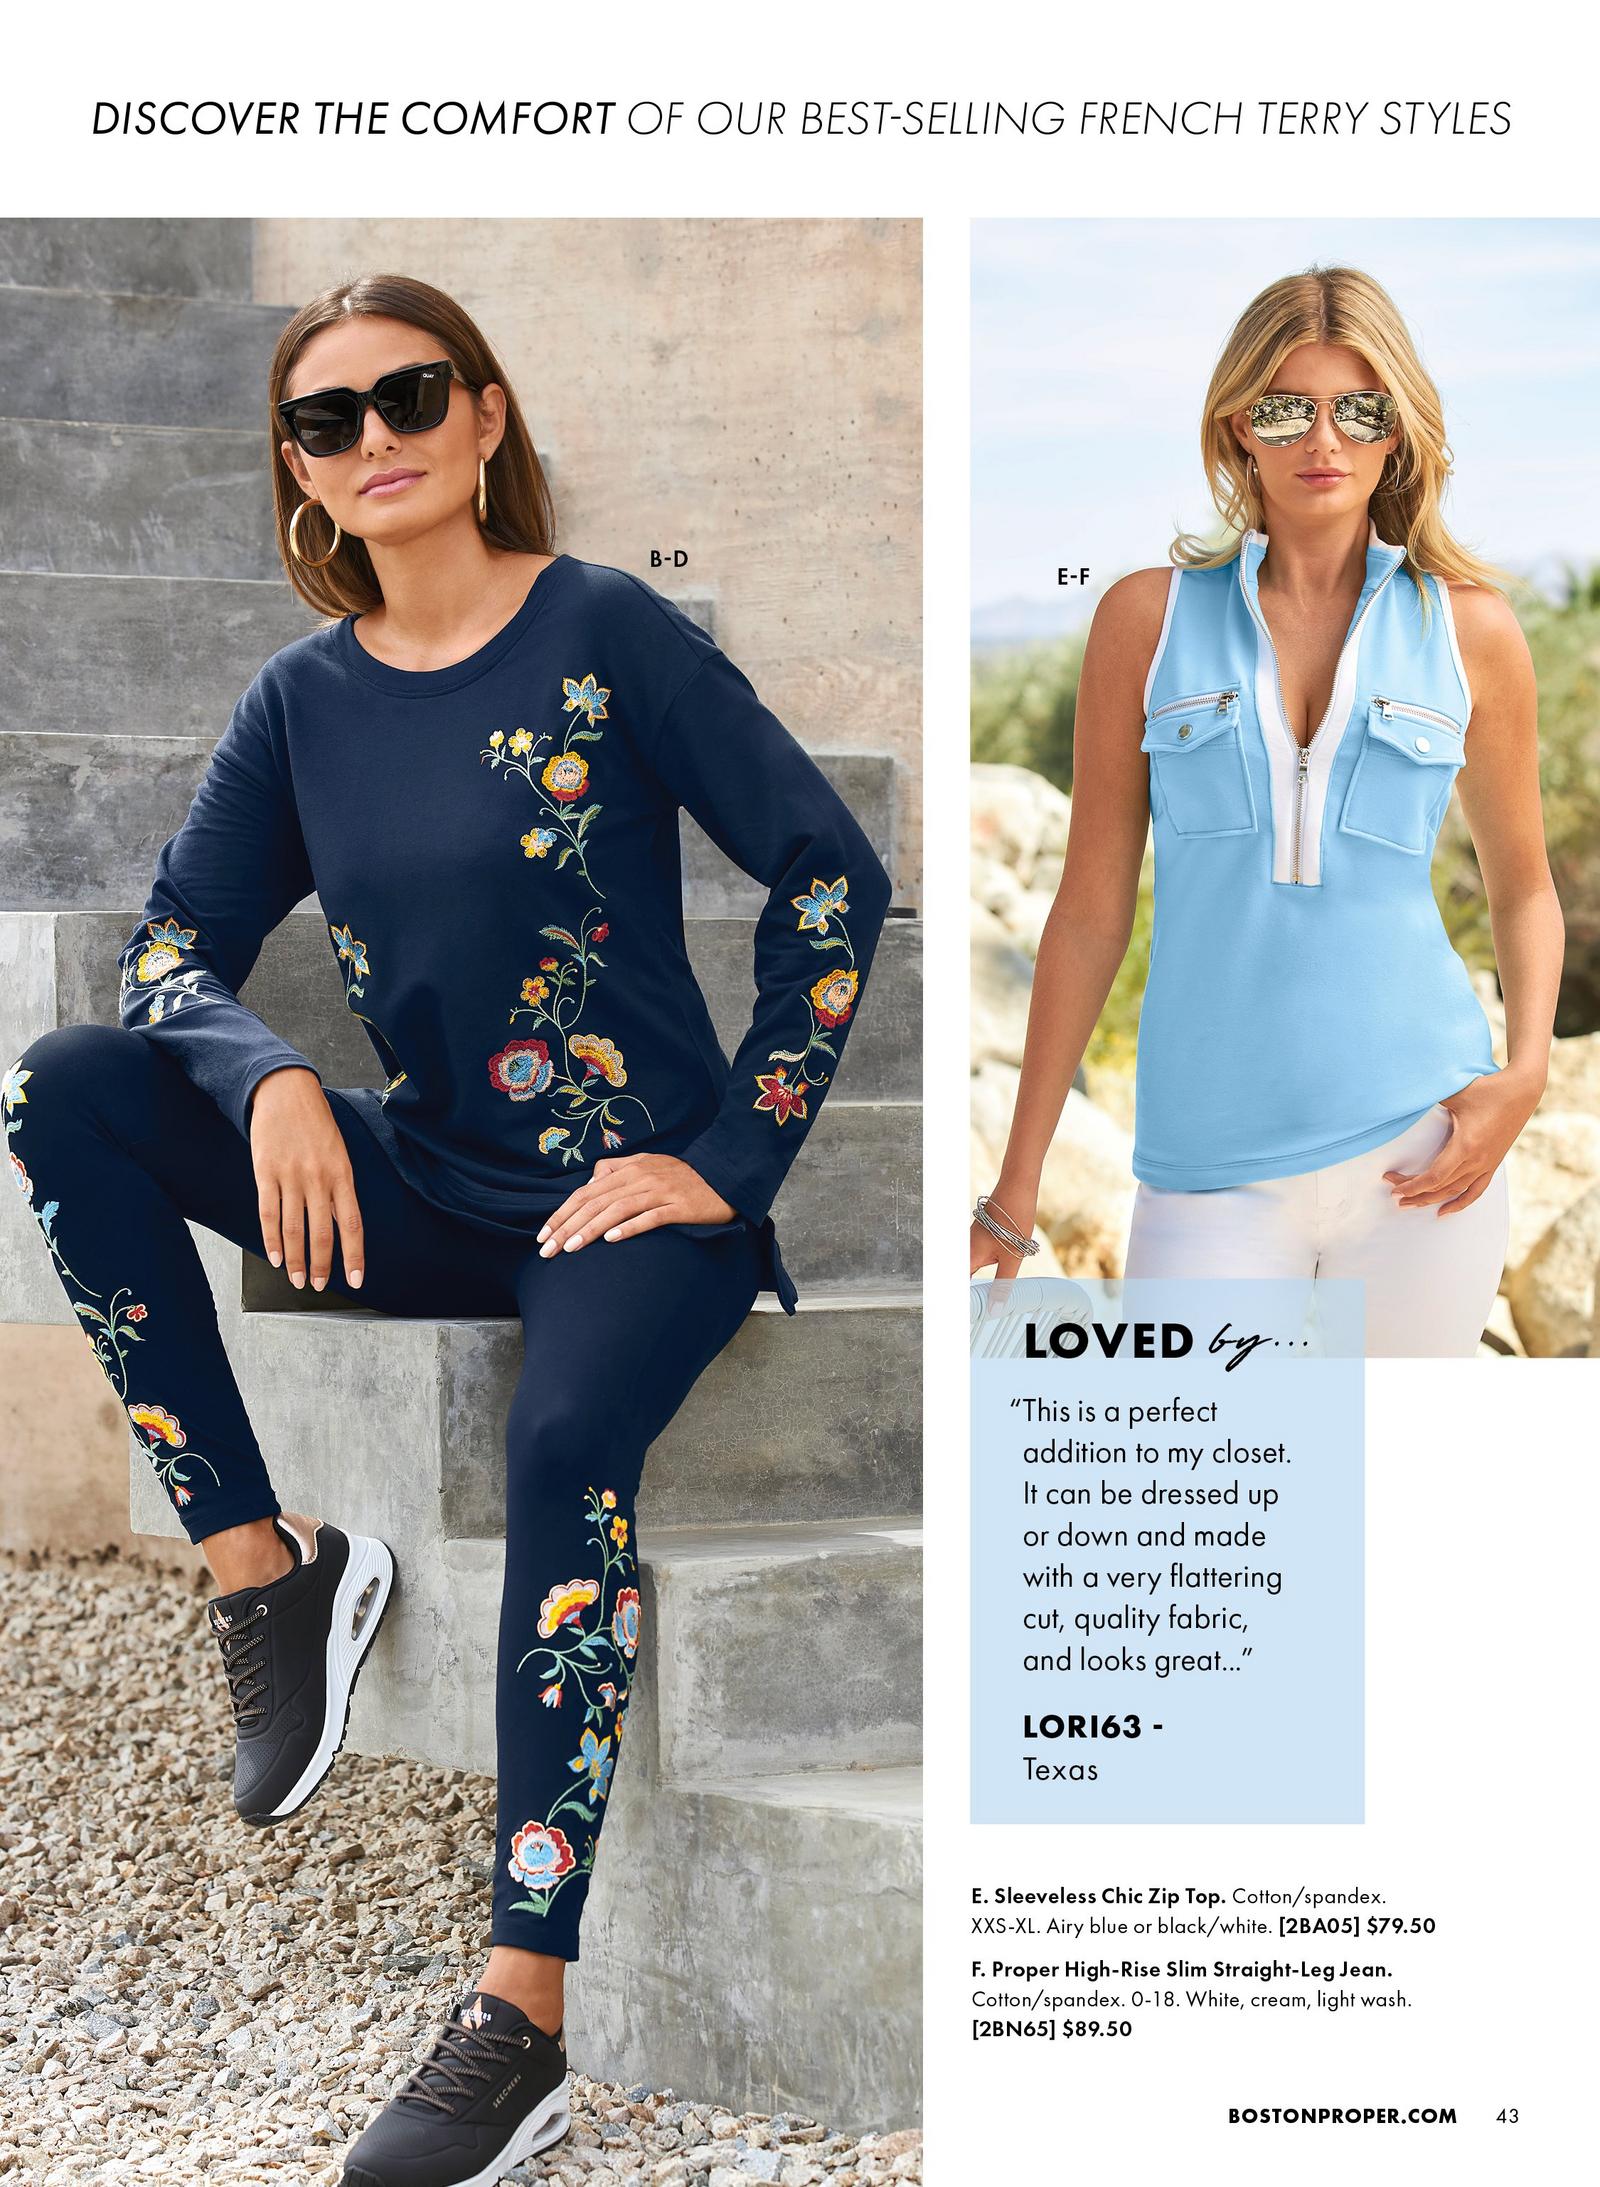 Model is wearing the thick statement hoop earrings, the embroidered tunic sweatshirt and the embroidered legging. A second model wears the sleeveless chic zip top in airy blue and the proper high rise slim straight leg jean in white.